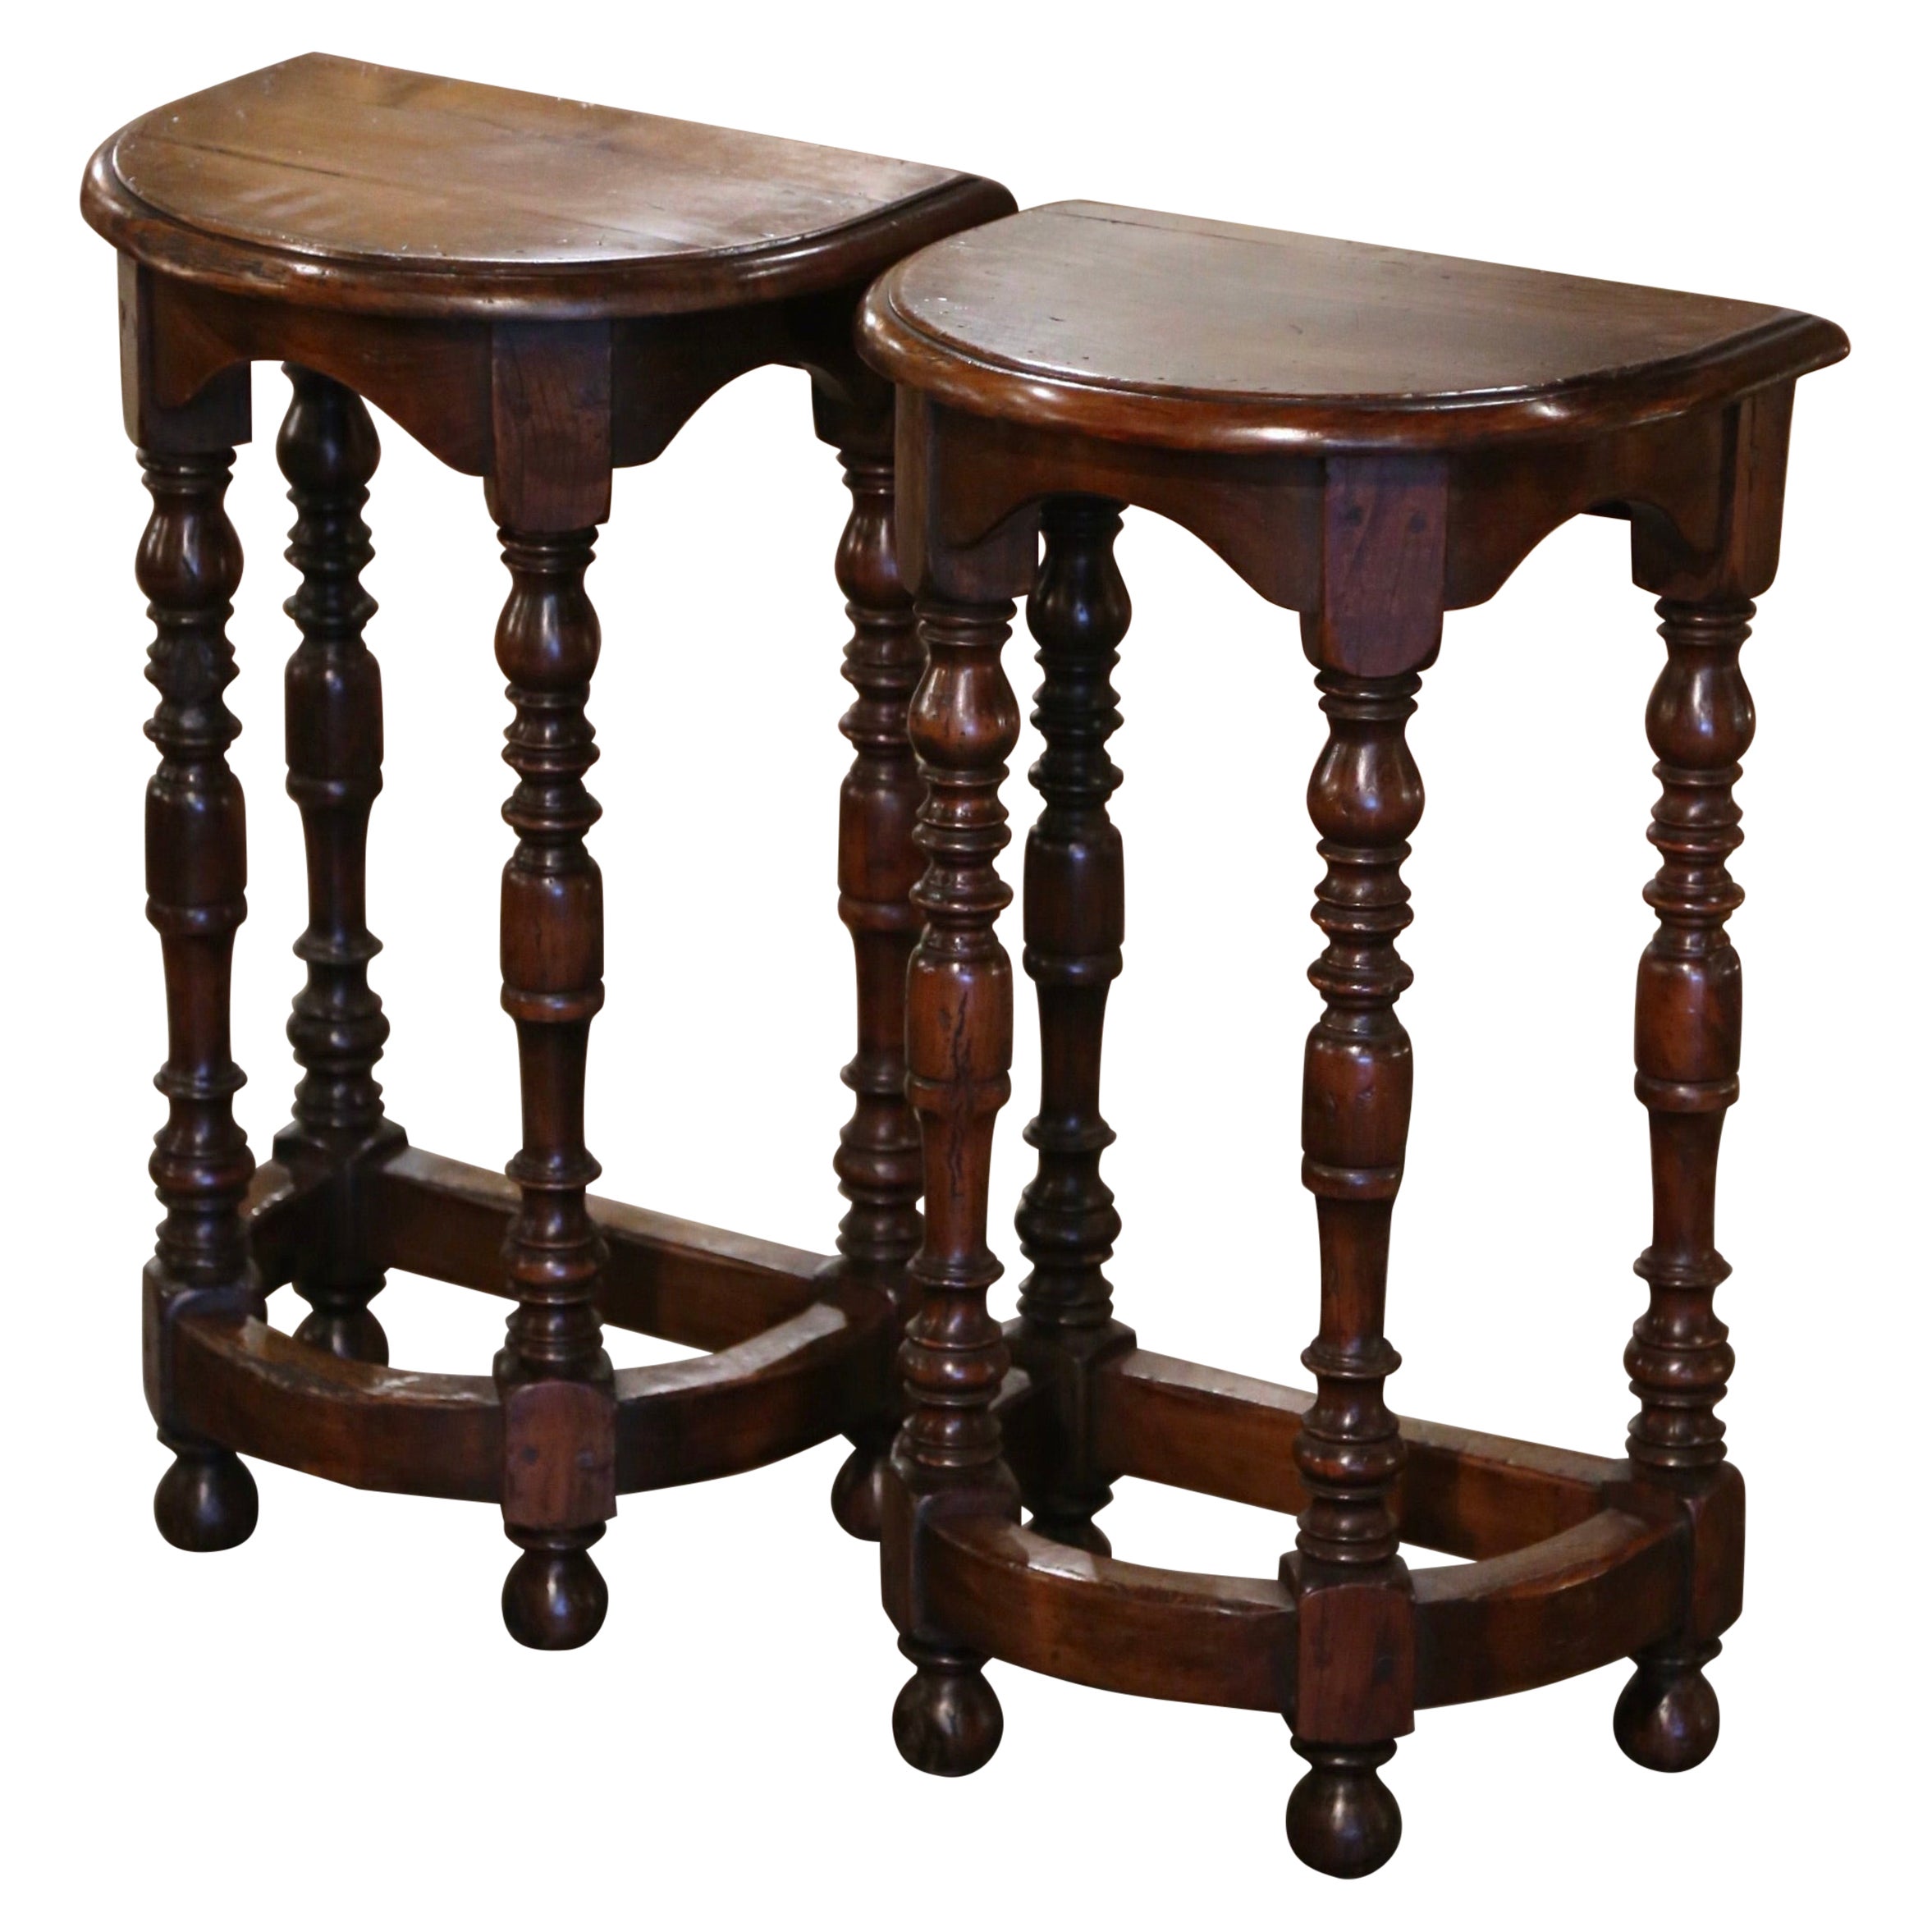 Pair Early 20th Century French Carved Oak Turned Leg Demilune Side Tables